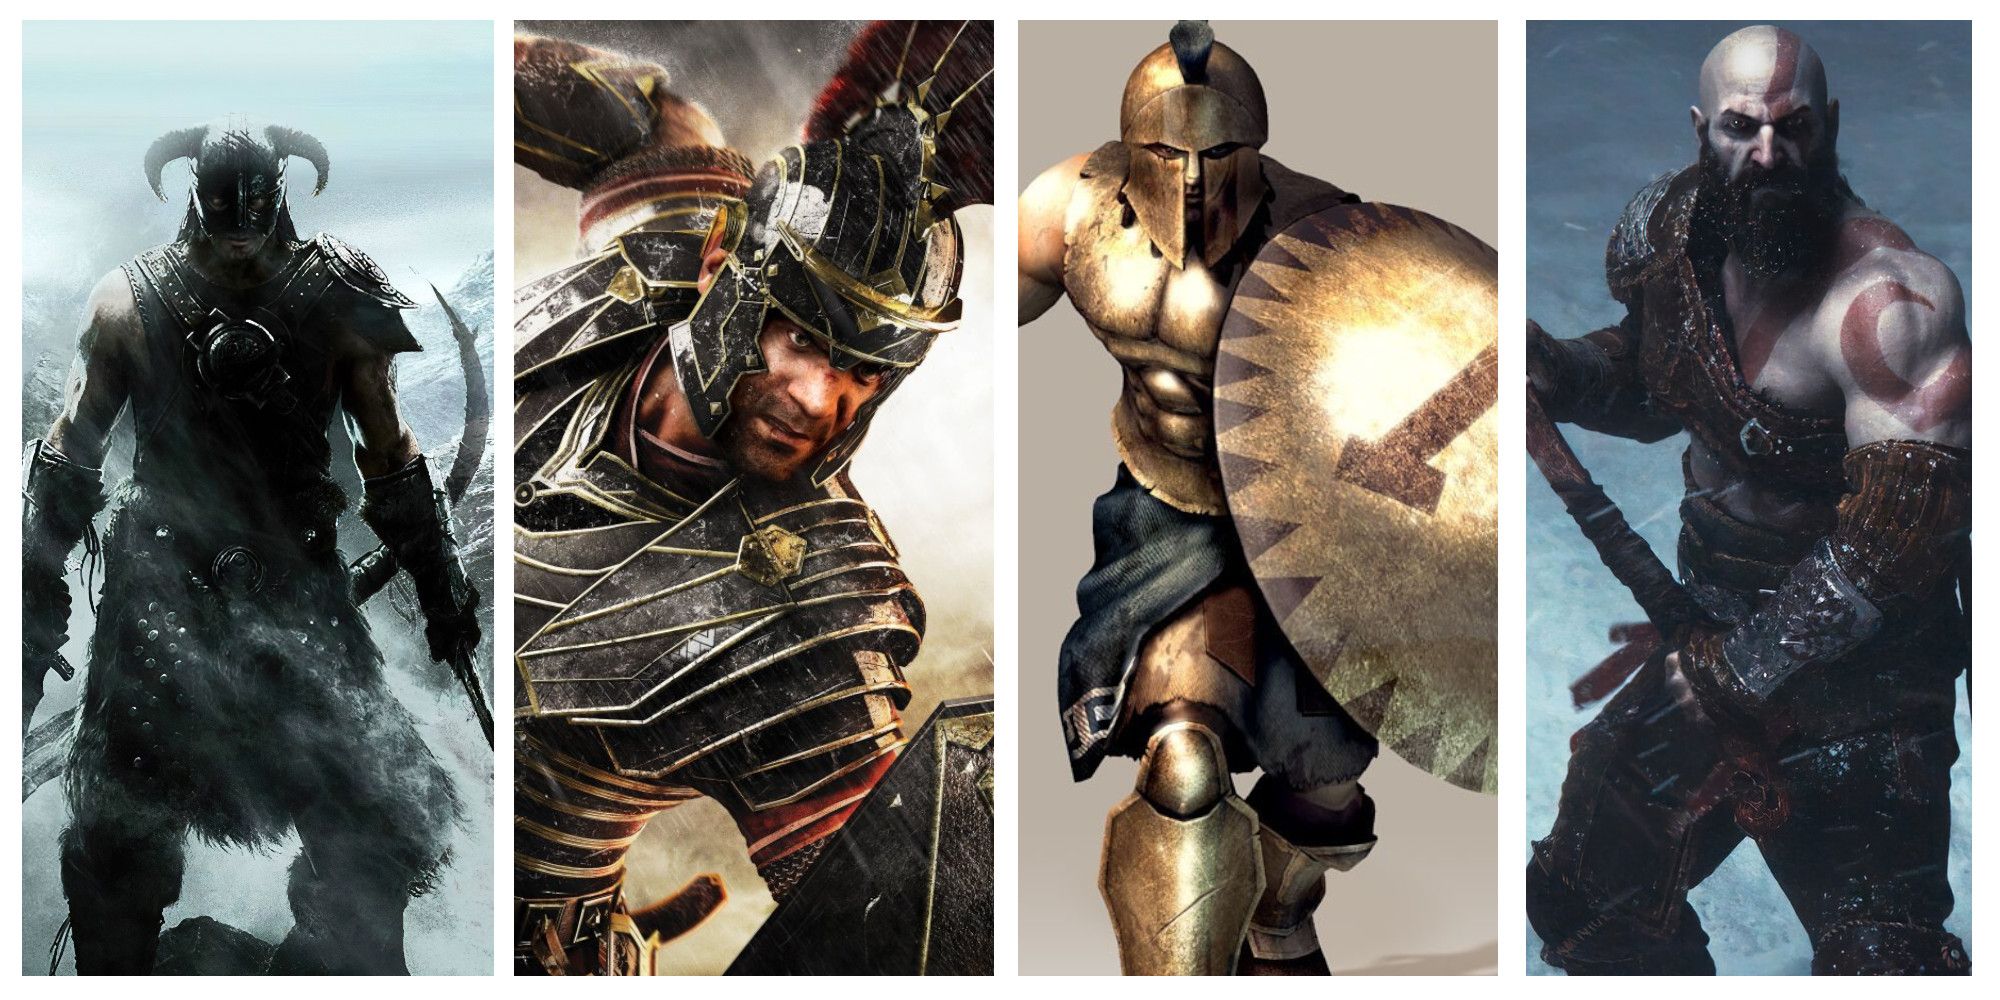 skyrim, ryse, spartan total warrior, and god of war characters